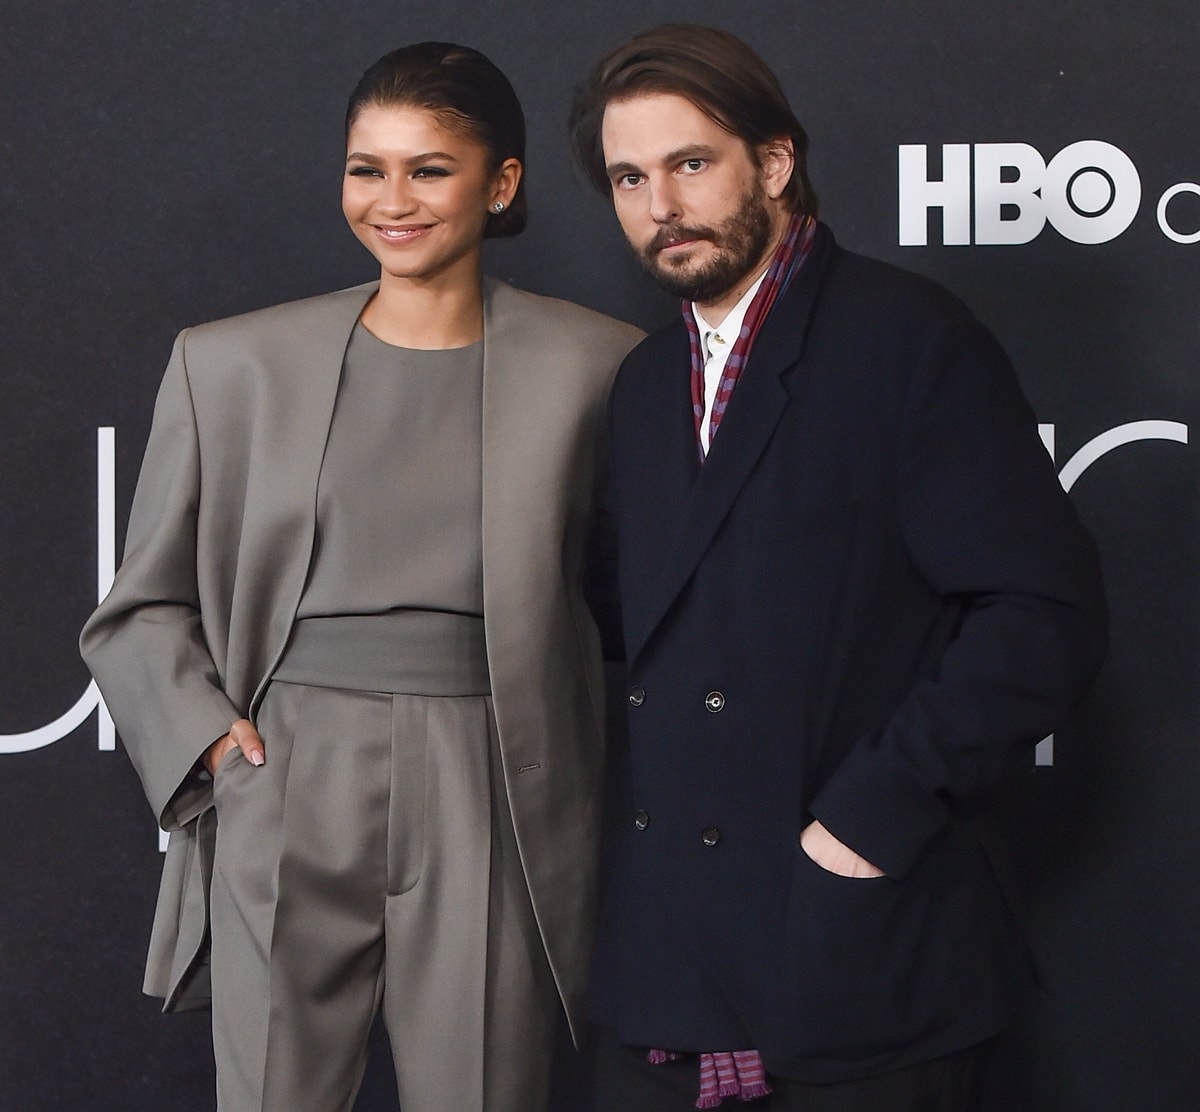 Zendaya in a gray Fear of God suit and Sam Levinson attend the HBO Max FYC event for "Euphoria"